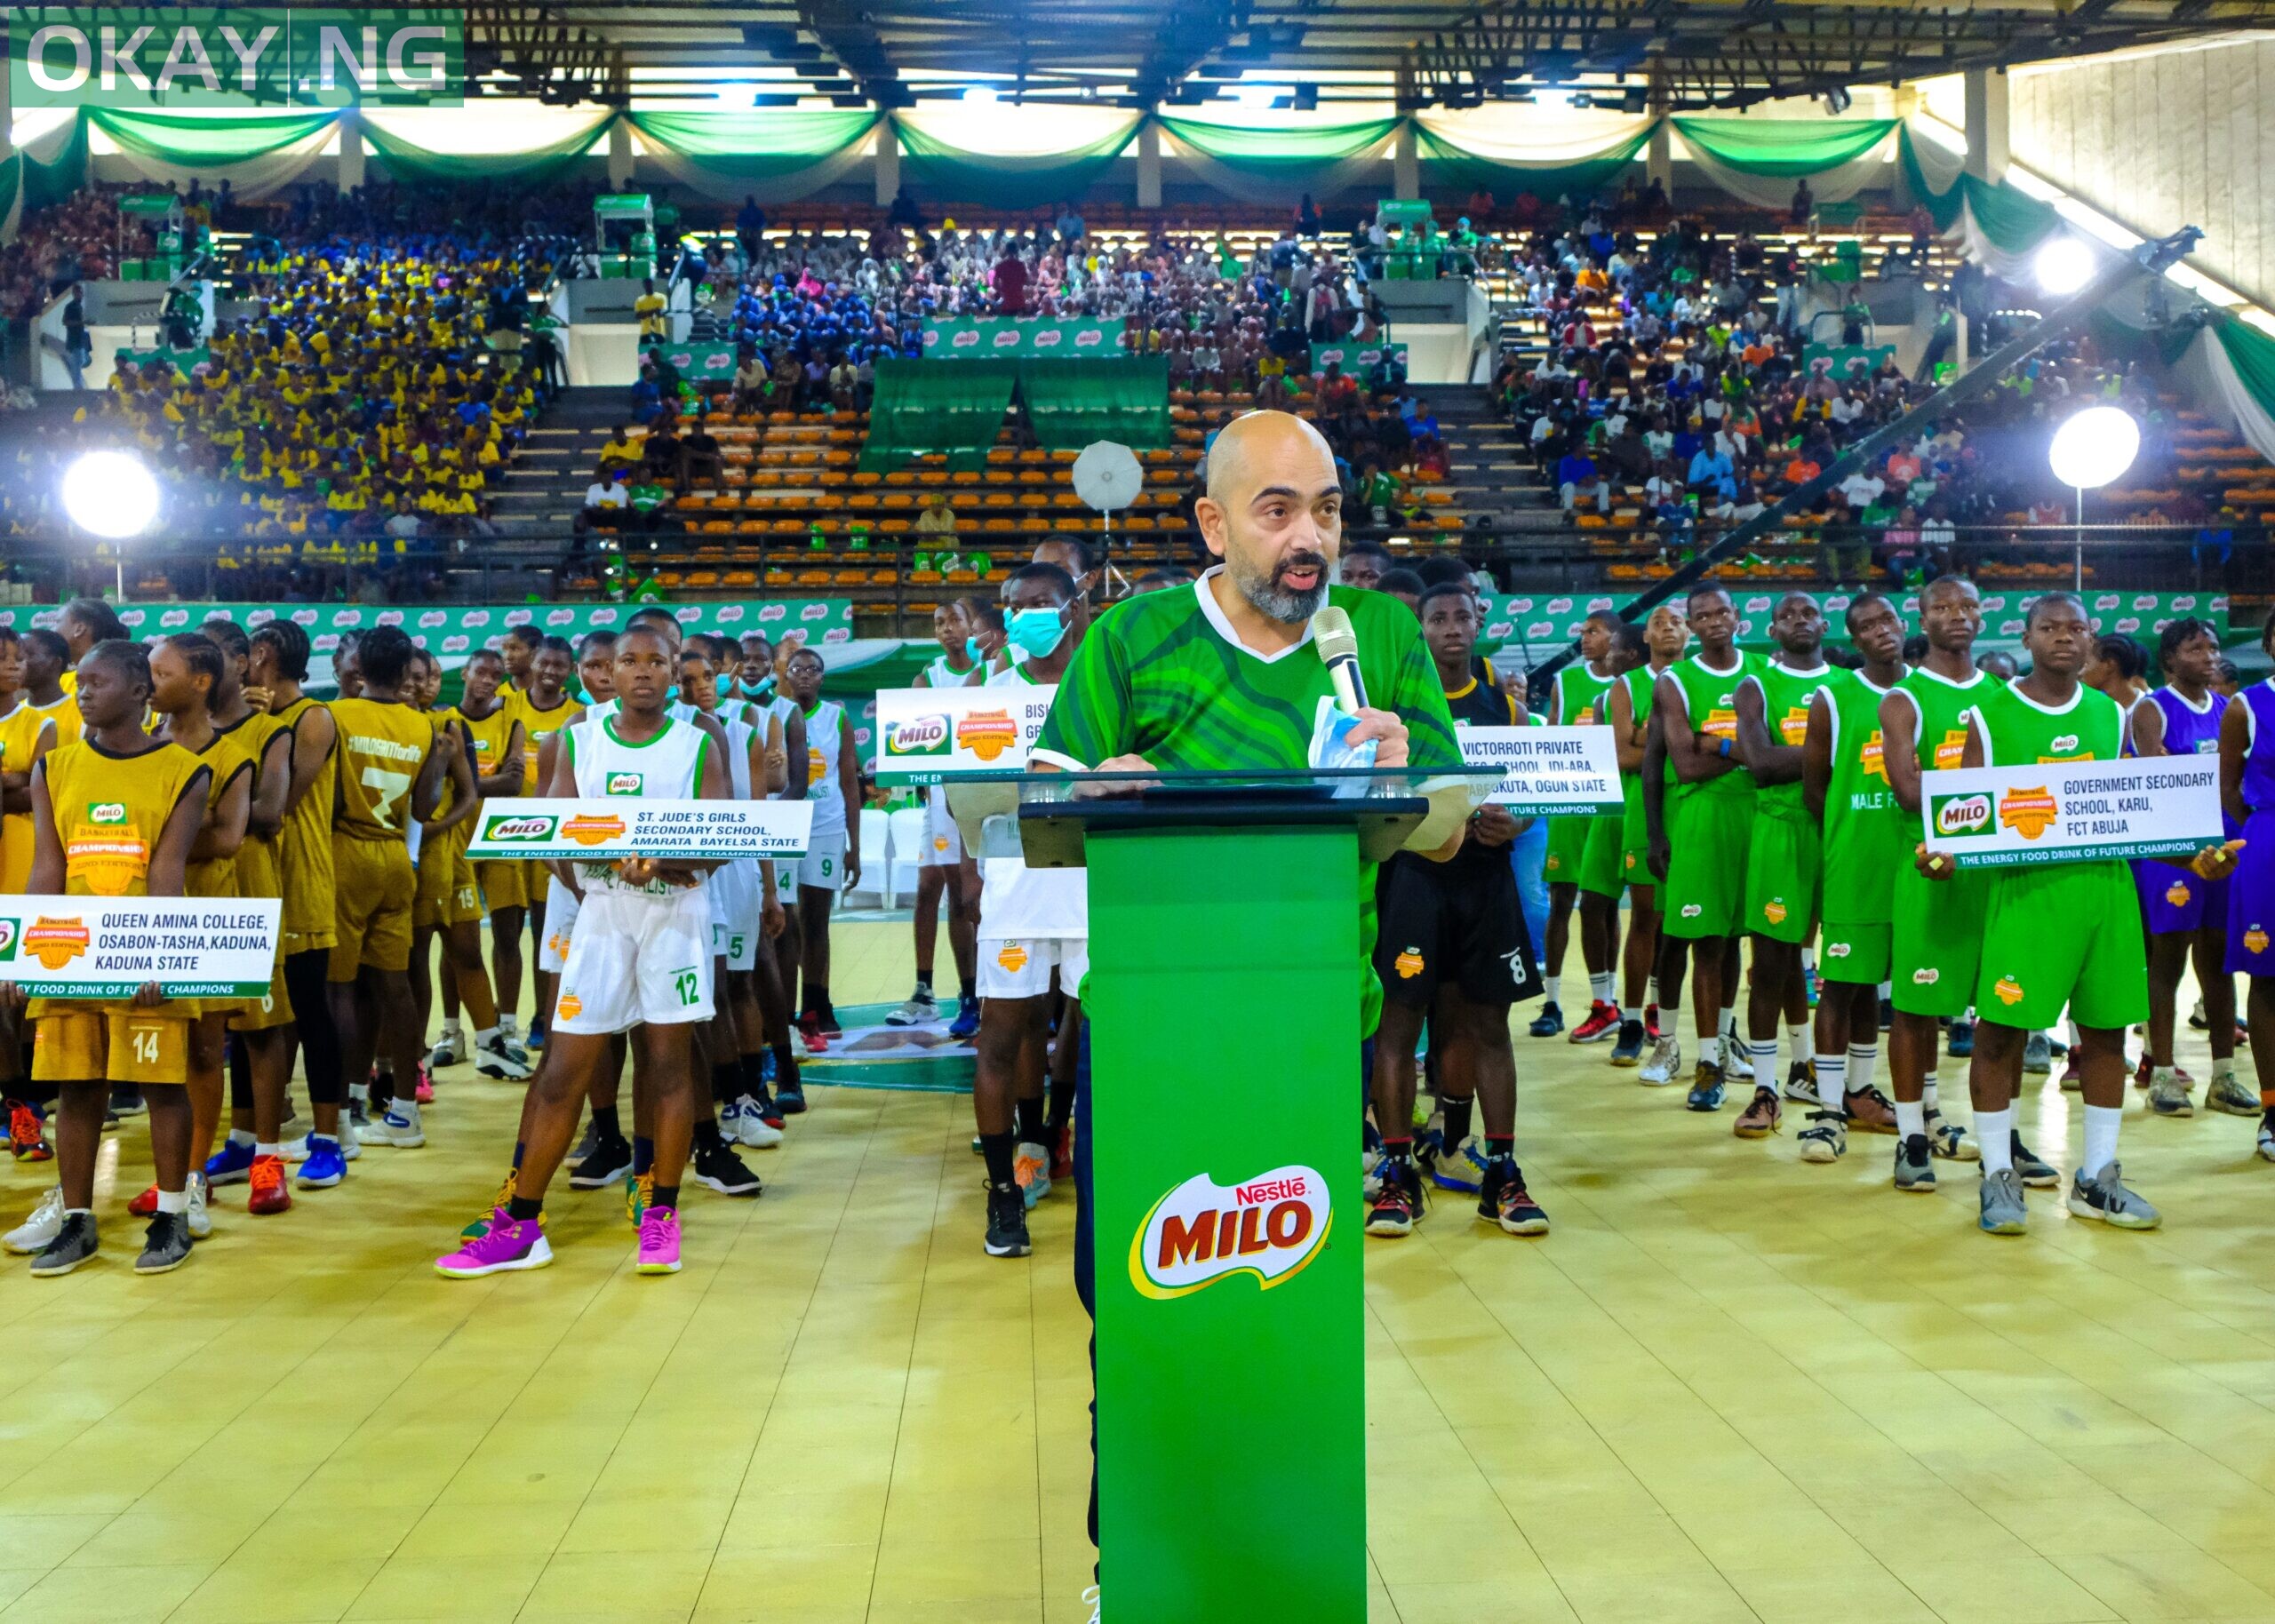 Wassim at MBC – Wassim El-Husseini, MD/CEO Nestlé Nigeria PLC addressing participants at the finale of the 22nd MILO Basketball Championship national finals at the Indoor Sports Hall of the National Stadium, Surulere, Lagos on Thursday June 30, 2022.